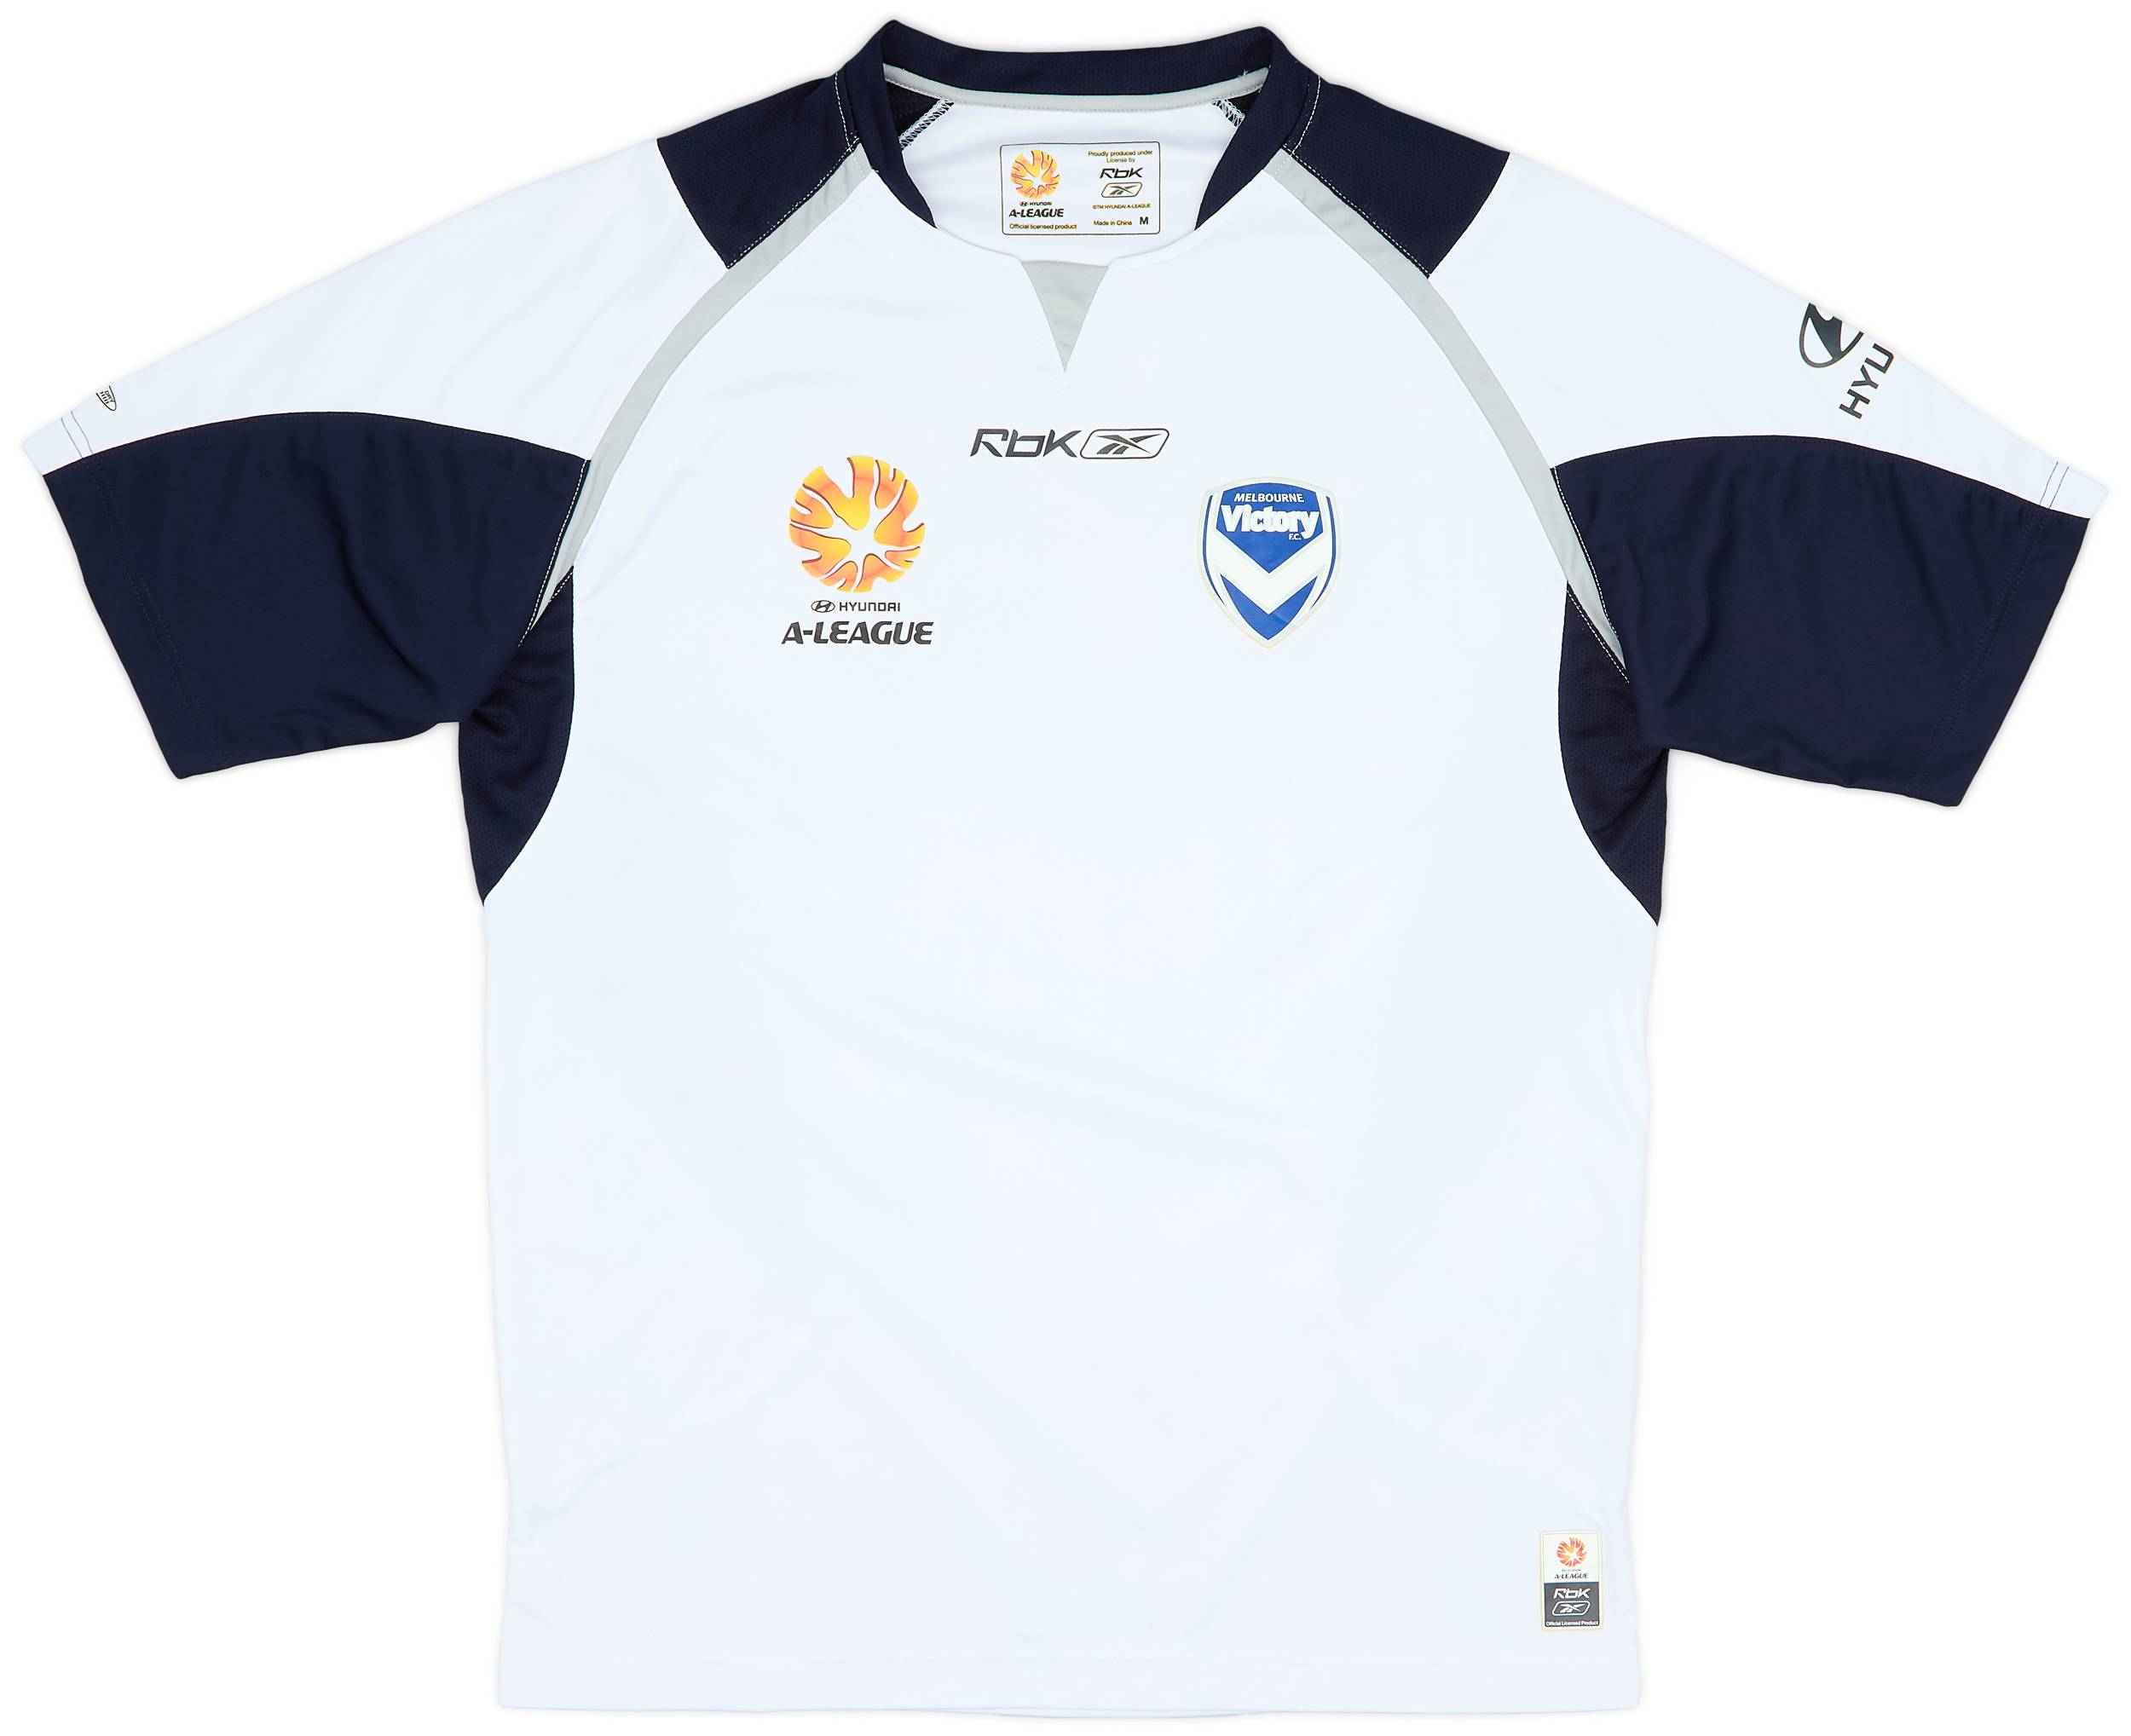 2005-06 Melbourne Victory Away Shirt - 9/10 - (M)